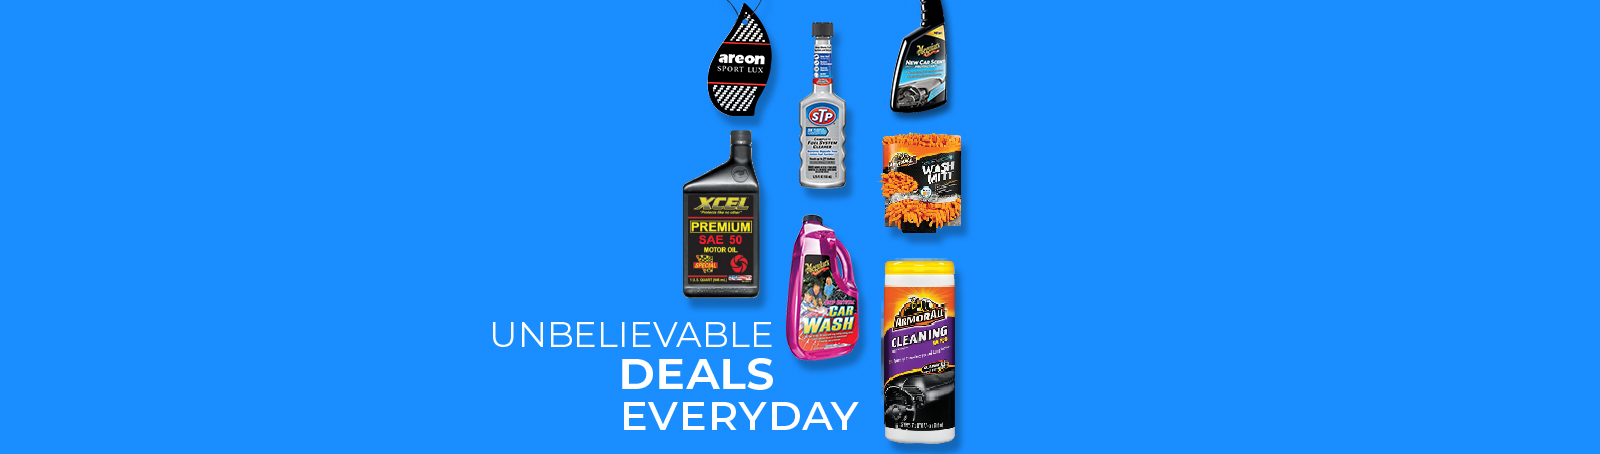 Unbelievable Deals Everyday in our Wholesale.